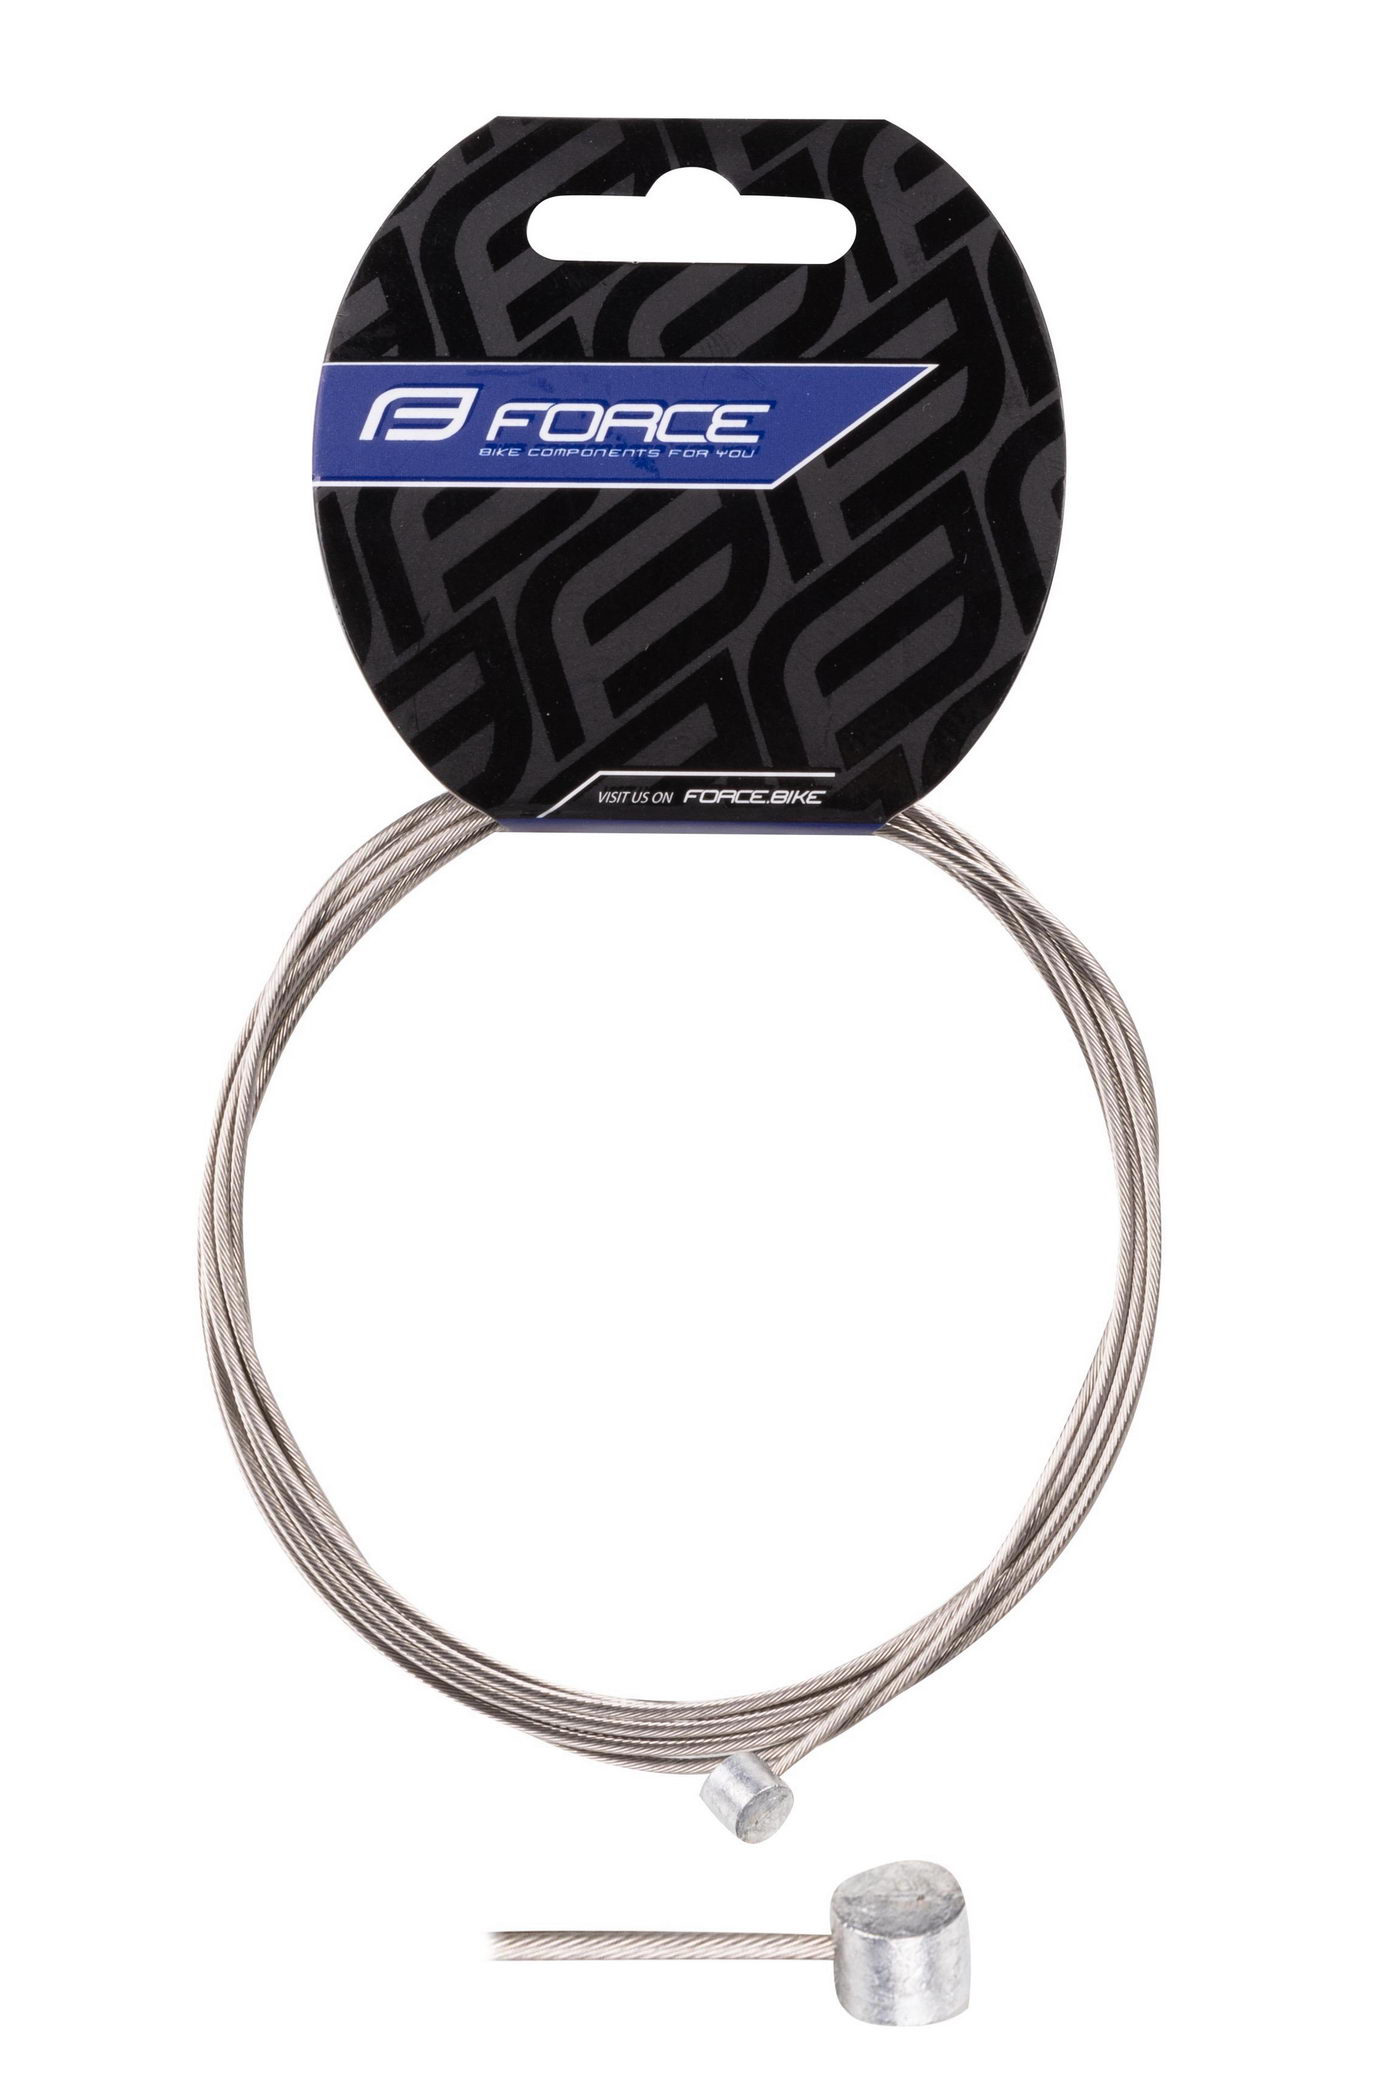 Sajla kočnice FORCE MTB 2,0m/1,5mm STAINLESS packed